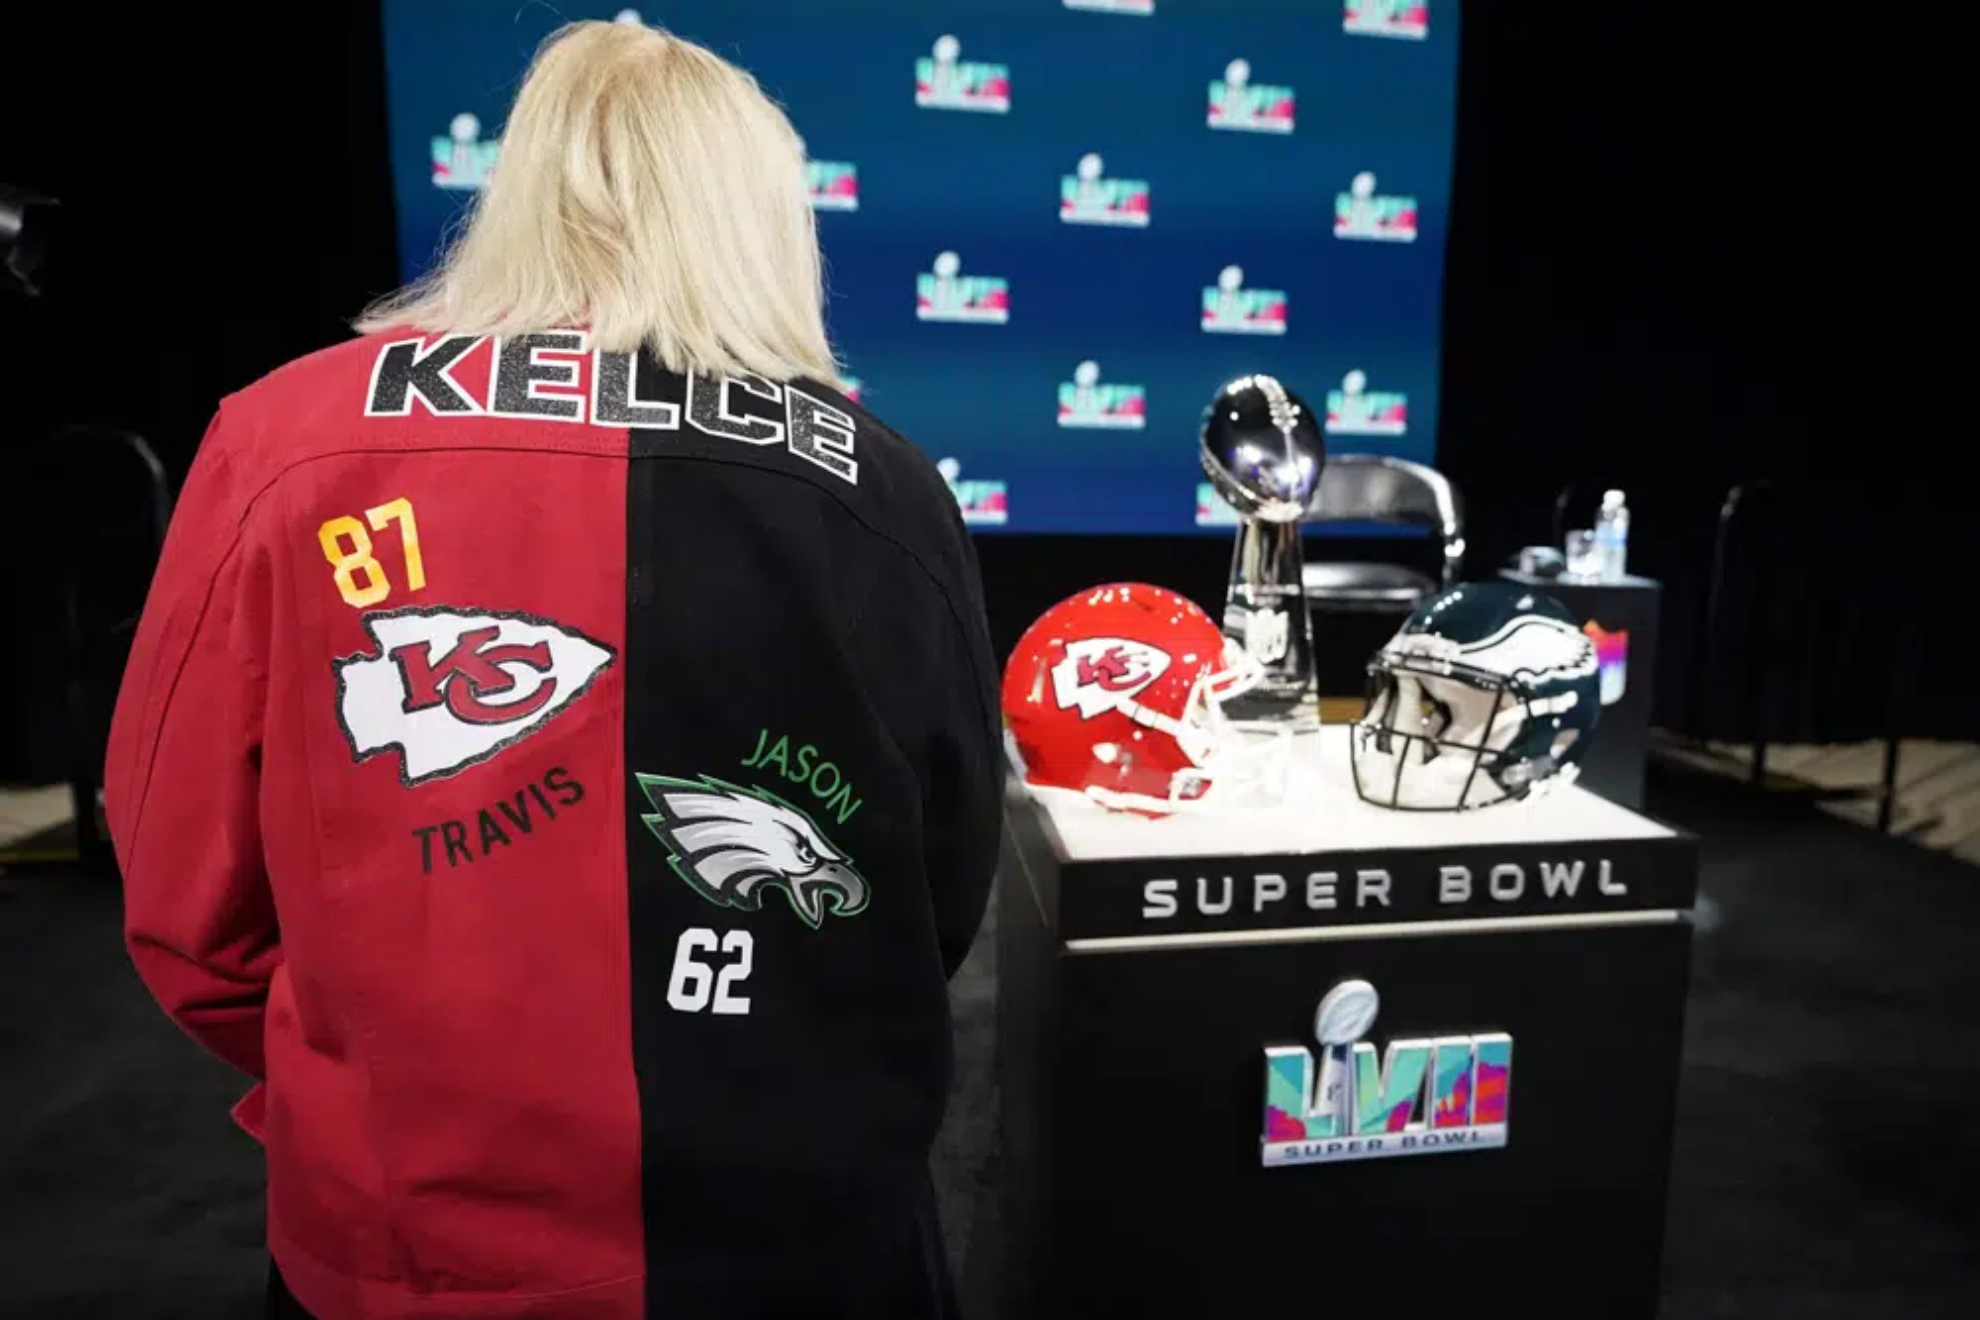 Donna Kelce, mother of Kansas City Chiefs tight end Travis Kelce and Philadelphia Eagles center Jason Kelce.